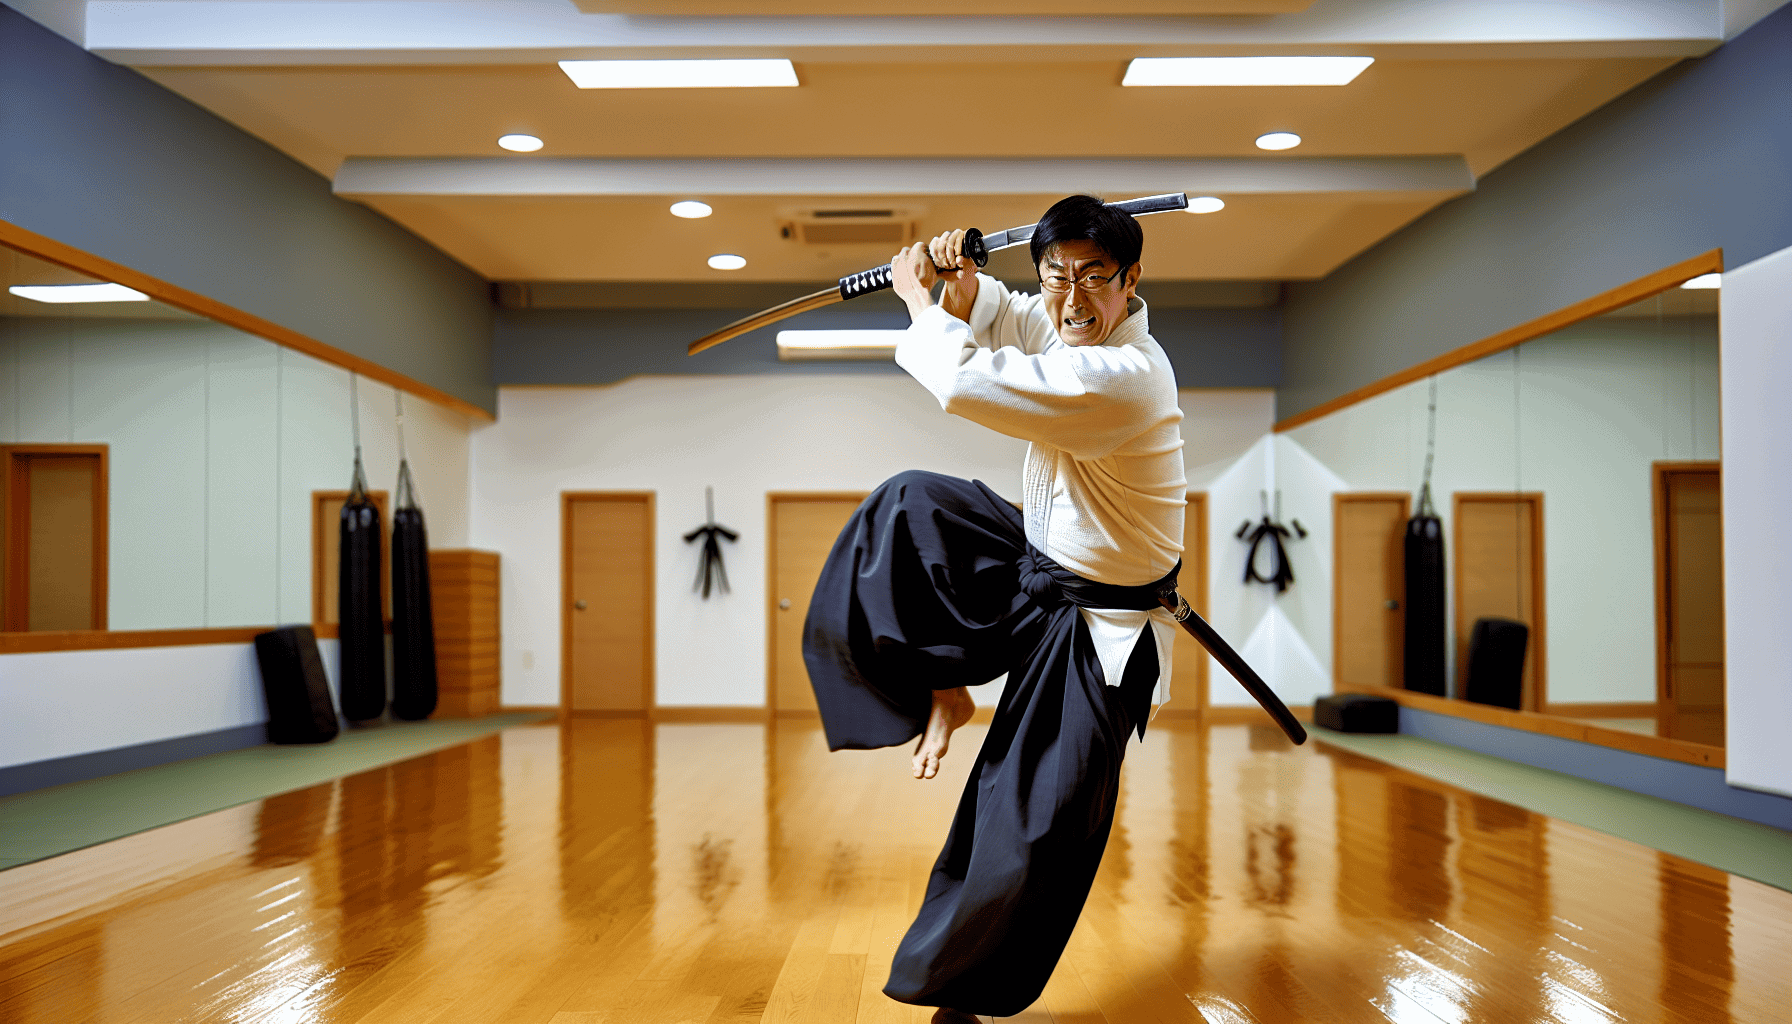 Martial arts and weapons training